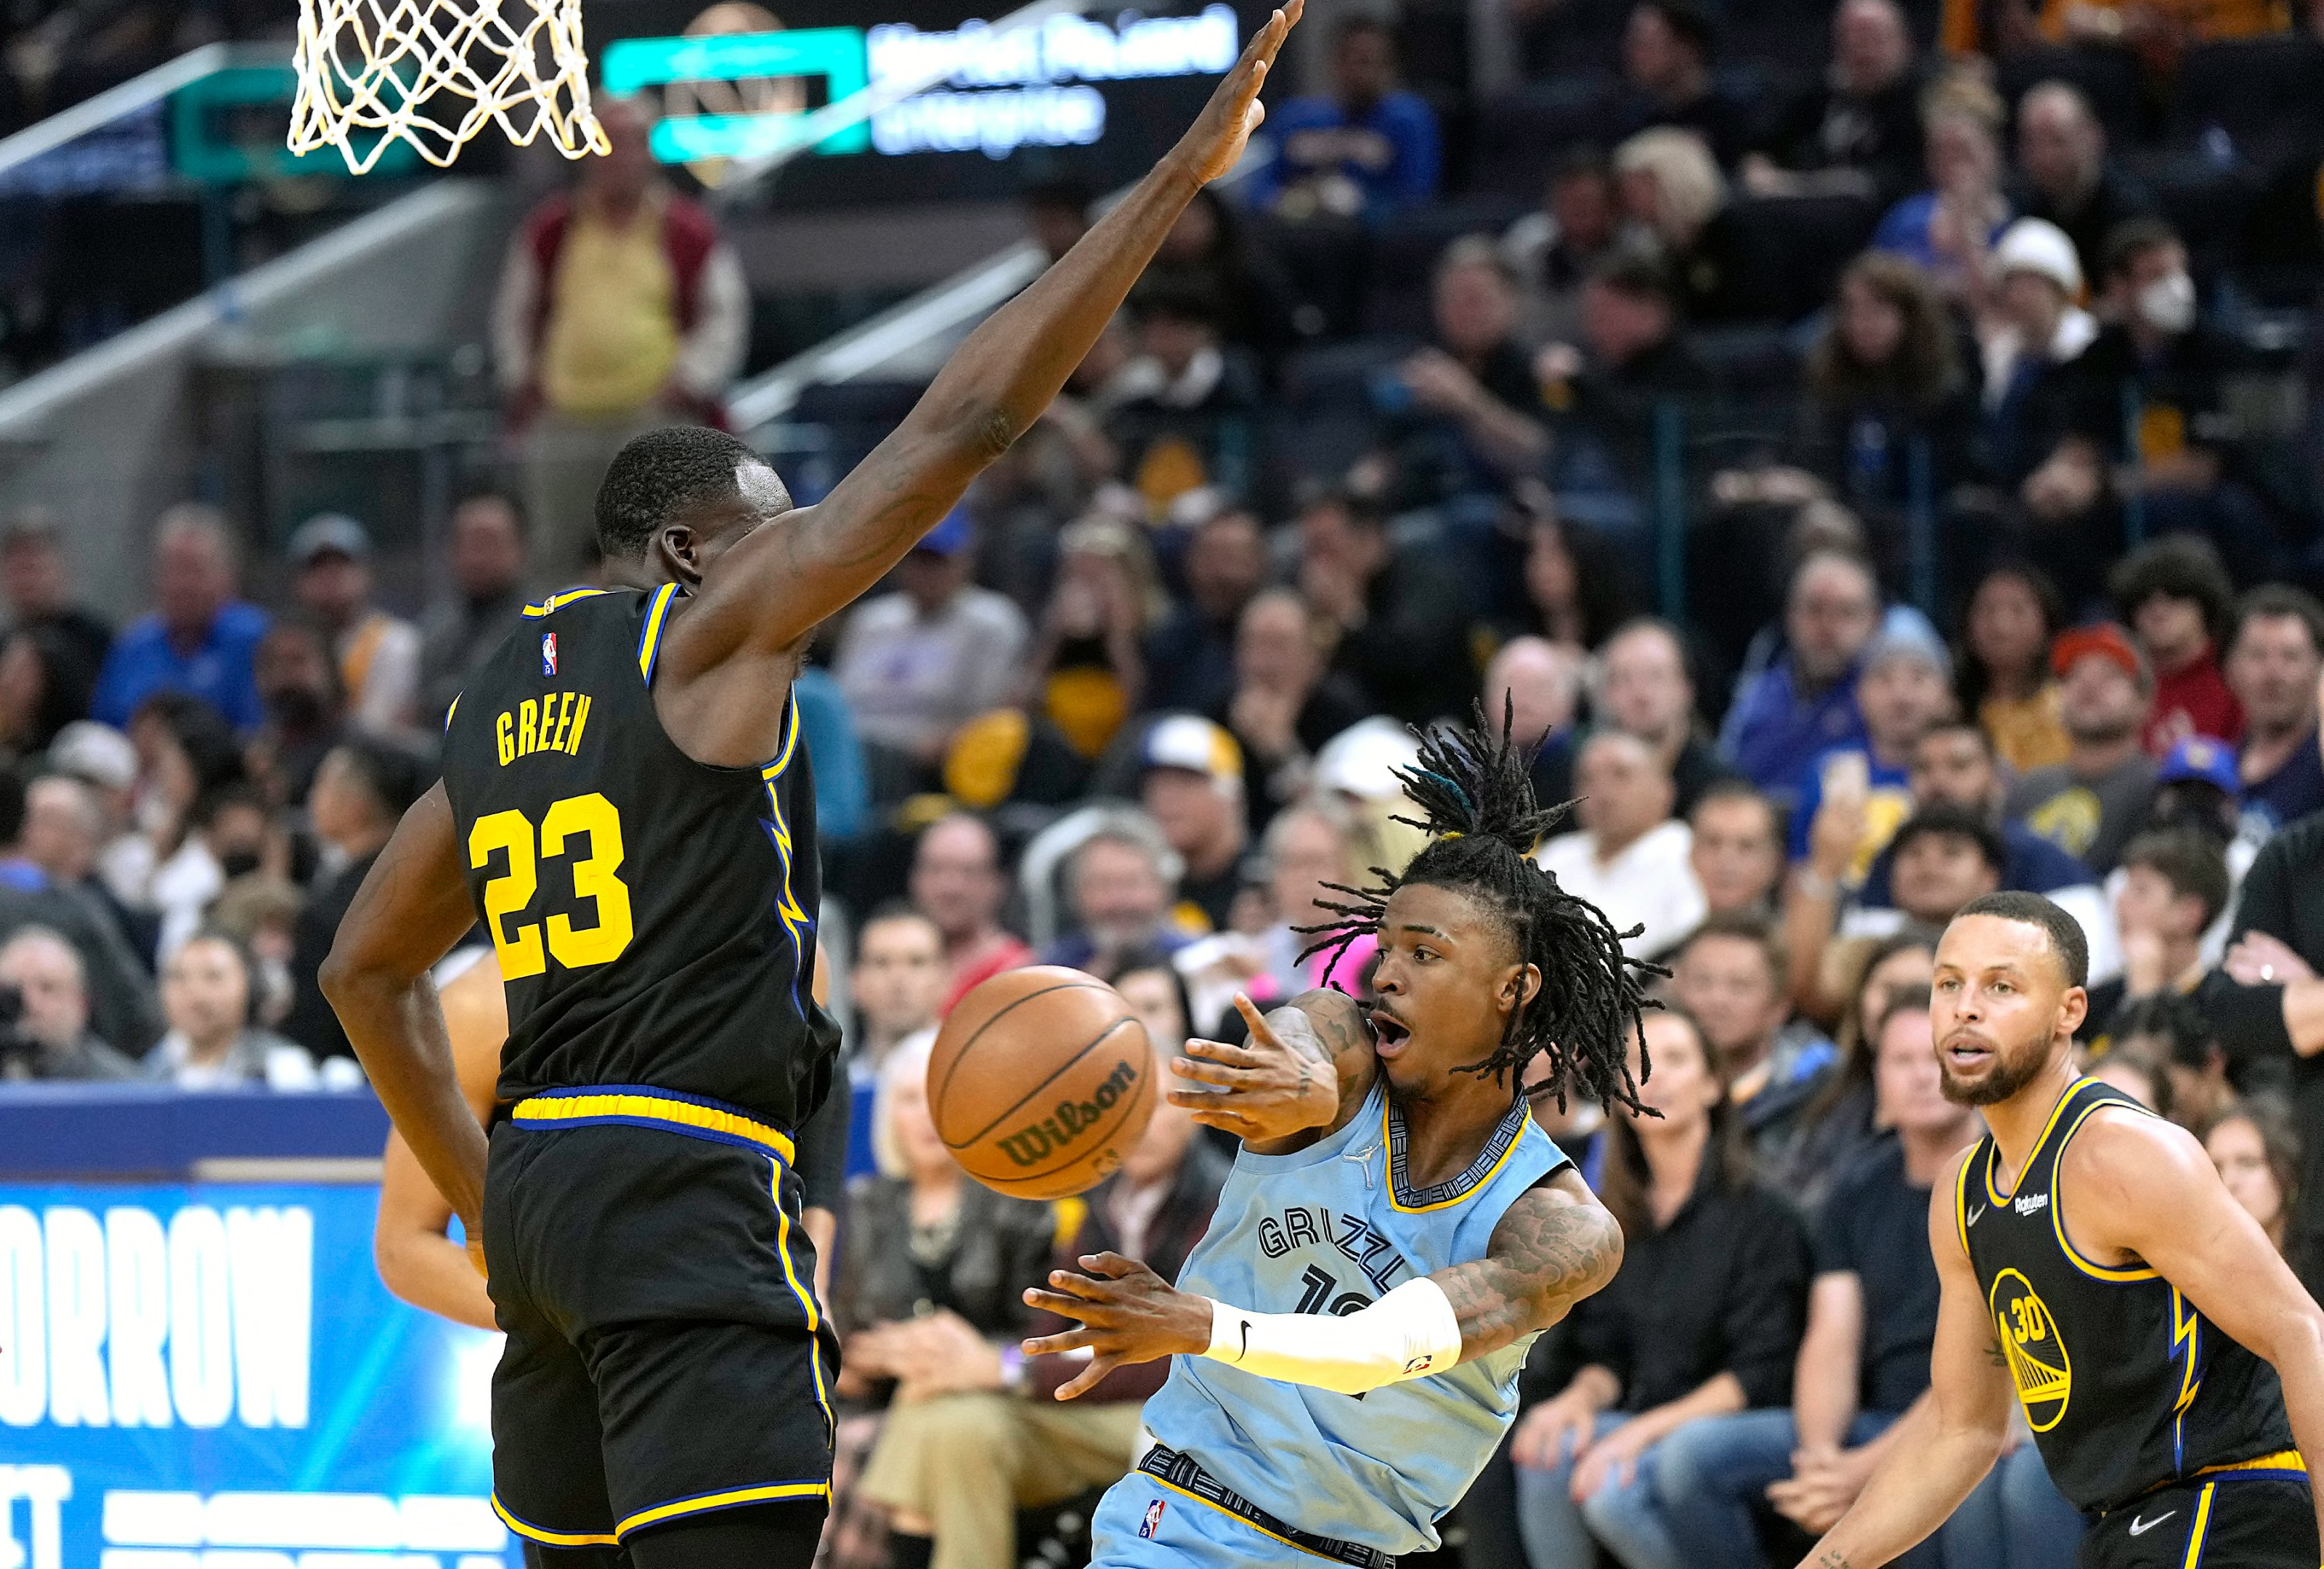 See Memphis Grizzlies' Ja Morant's Courtside Moment with Daughter